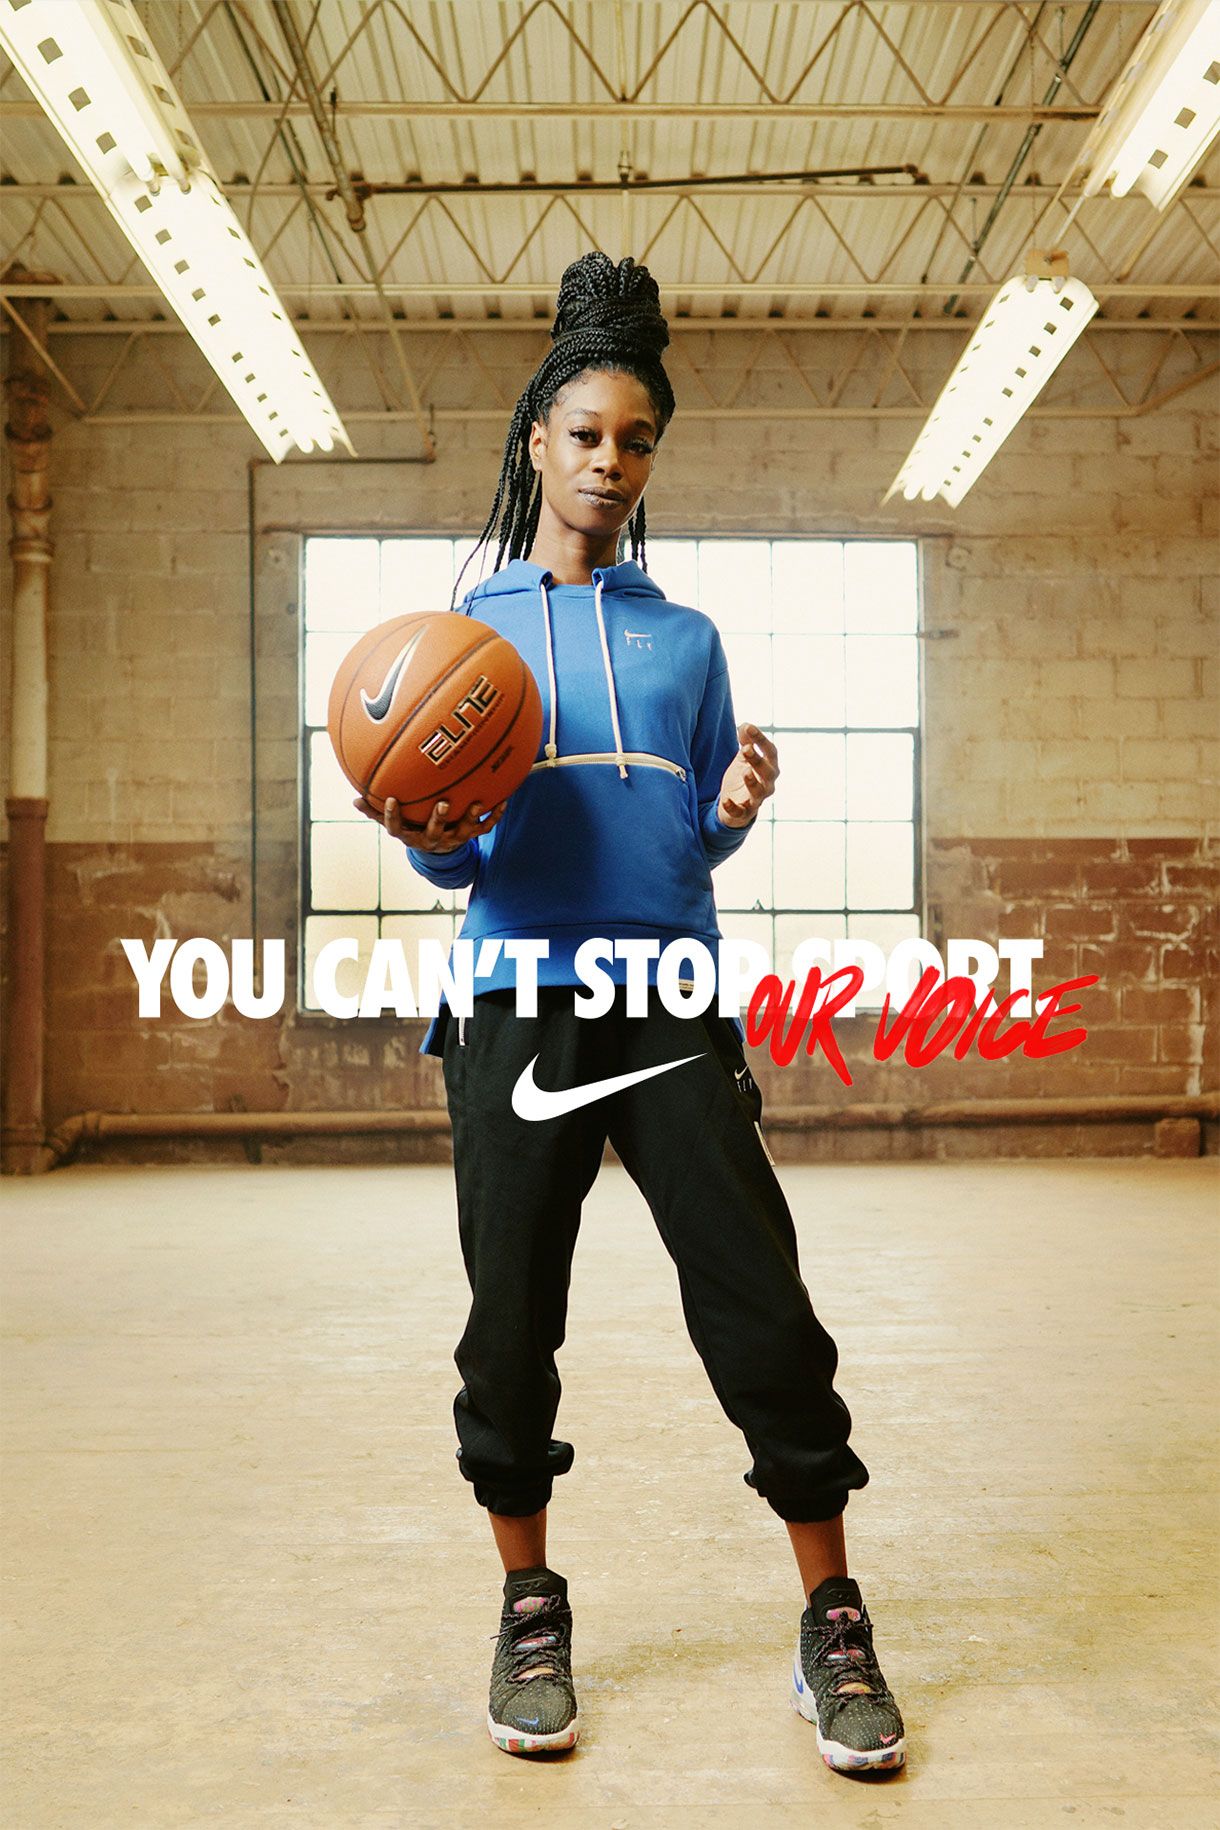 Tamara holding basketball You Can't Stop Sport / Our Voice. Nike Swoosh